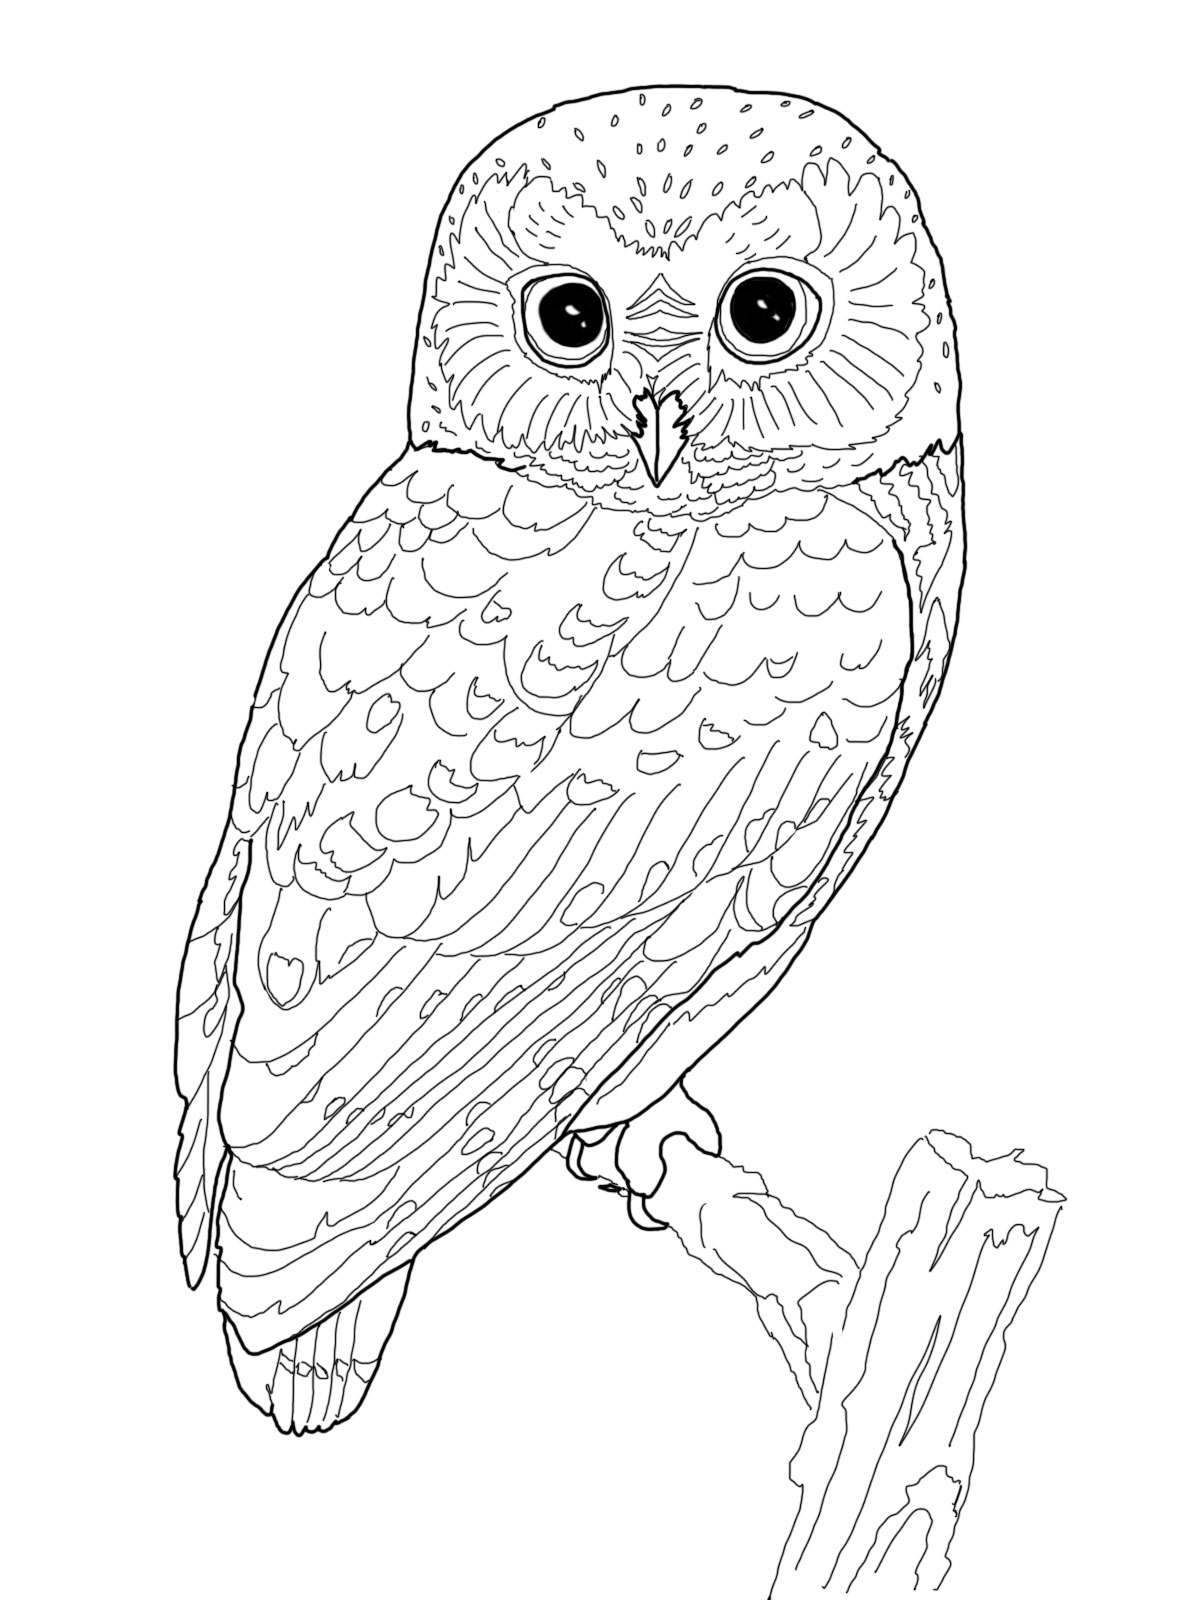 Download Owl Coloring Pages | Owl Coloring Pages